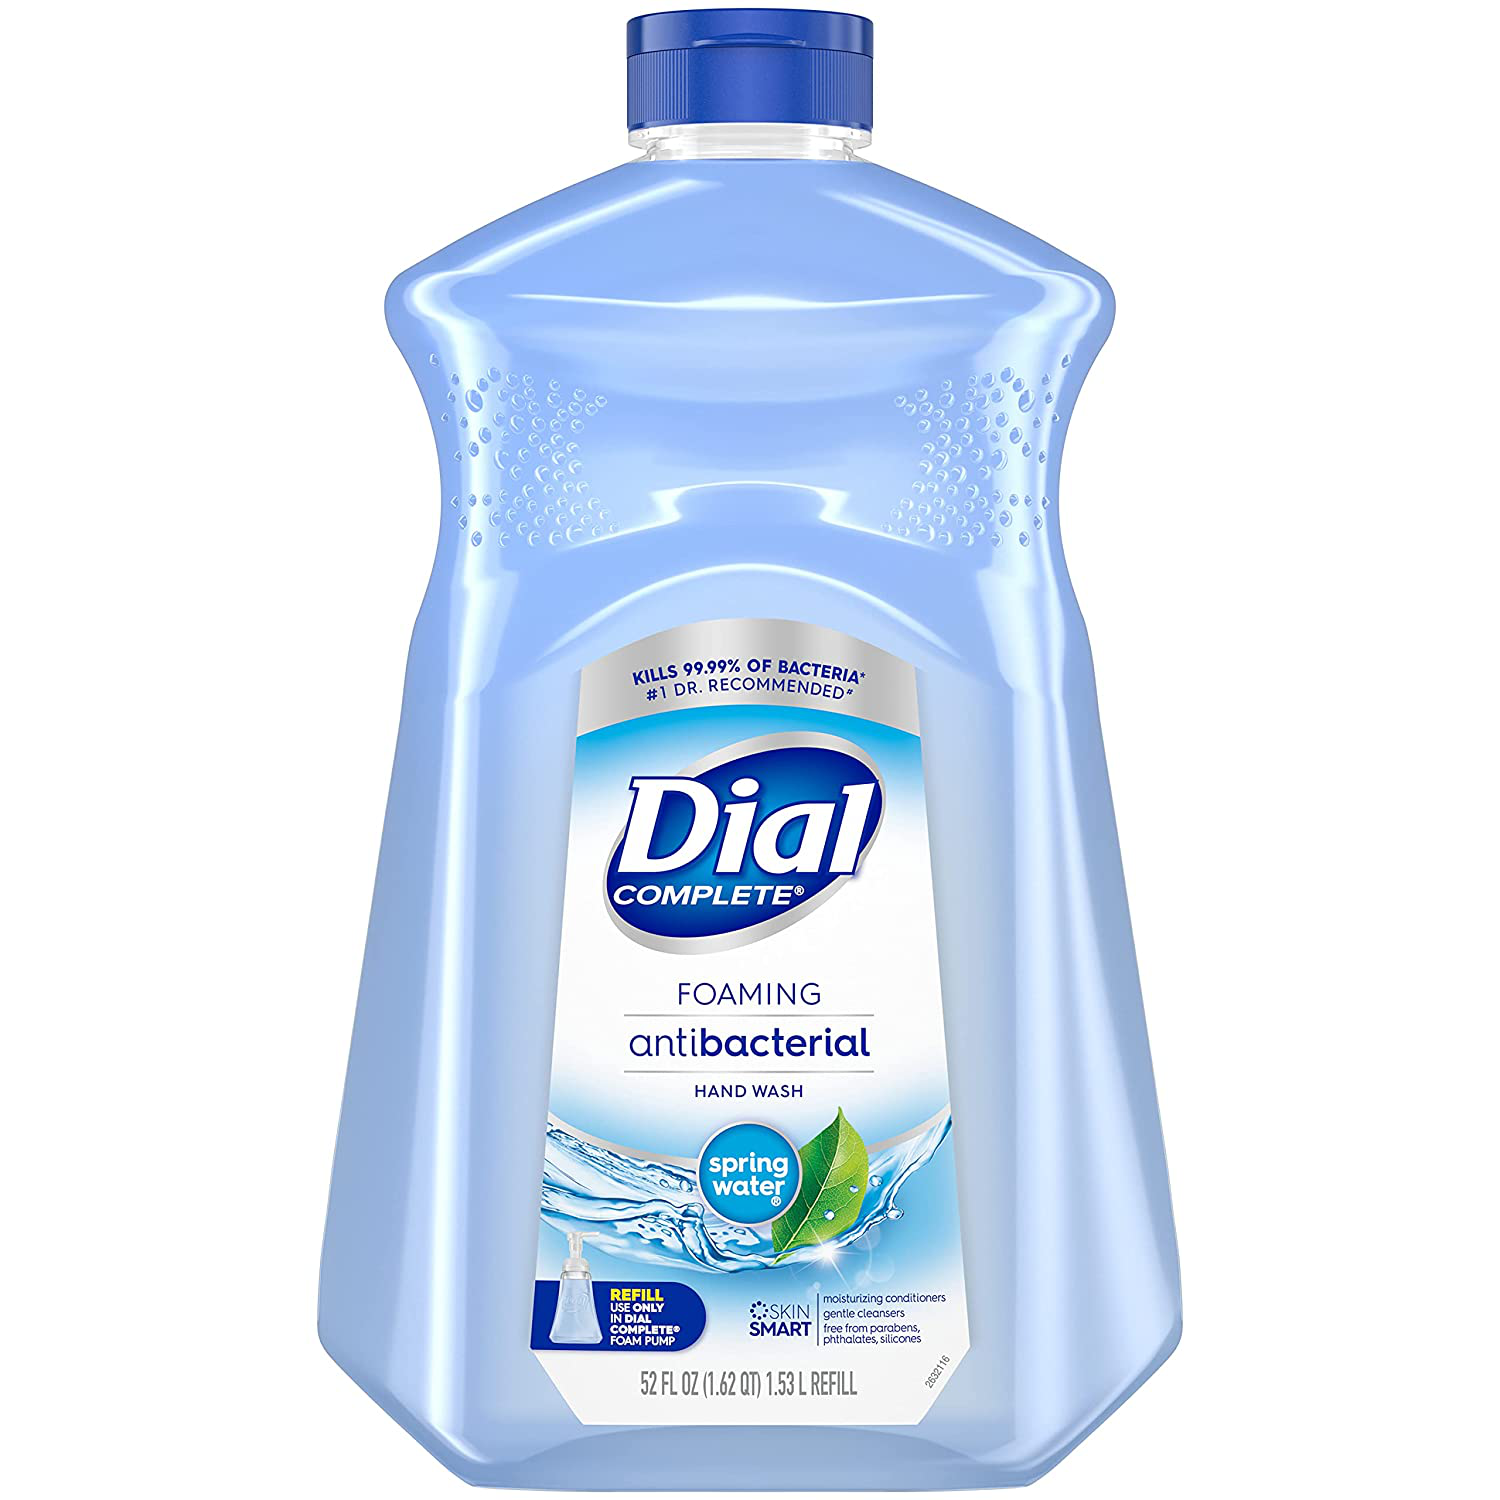 Dial Complete Antibacterial Foaming Hand Soap, Spring Water, 52 Fl Oz Refill